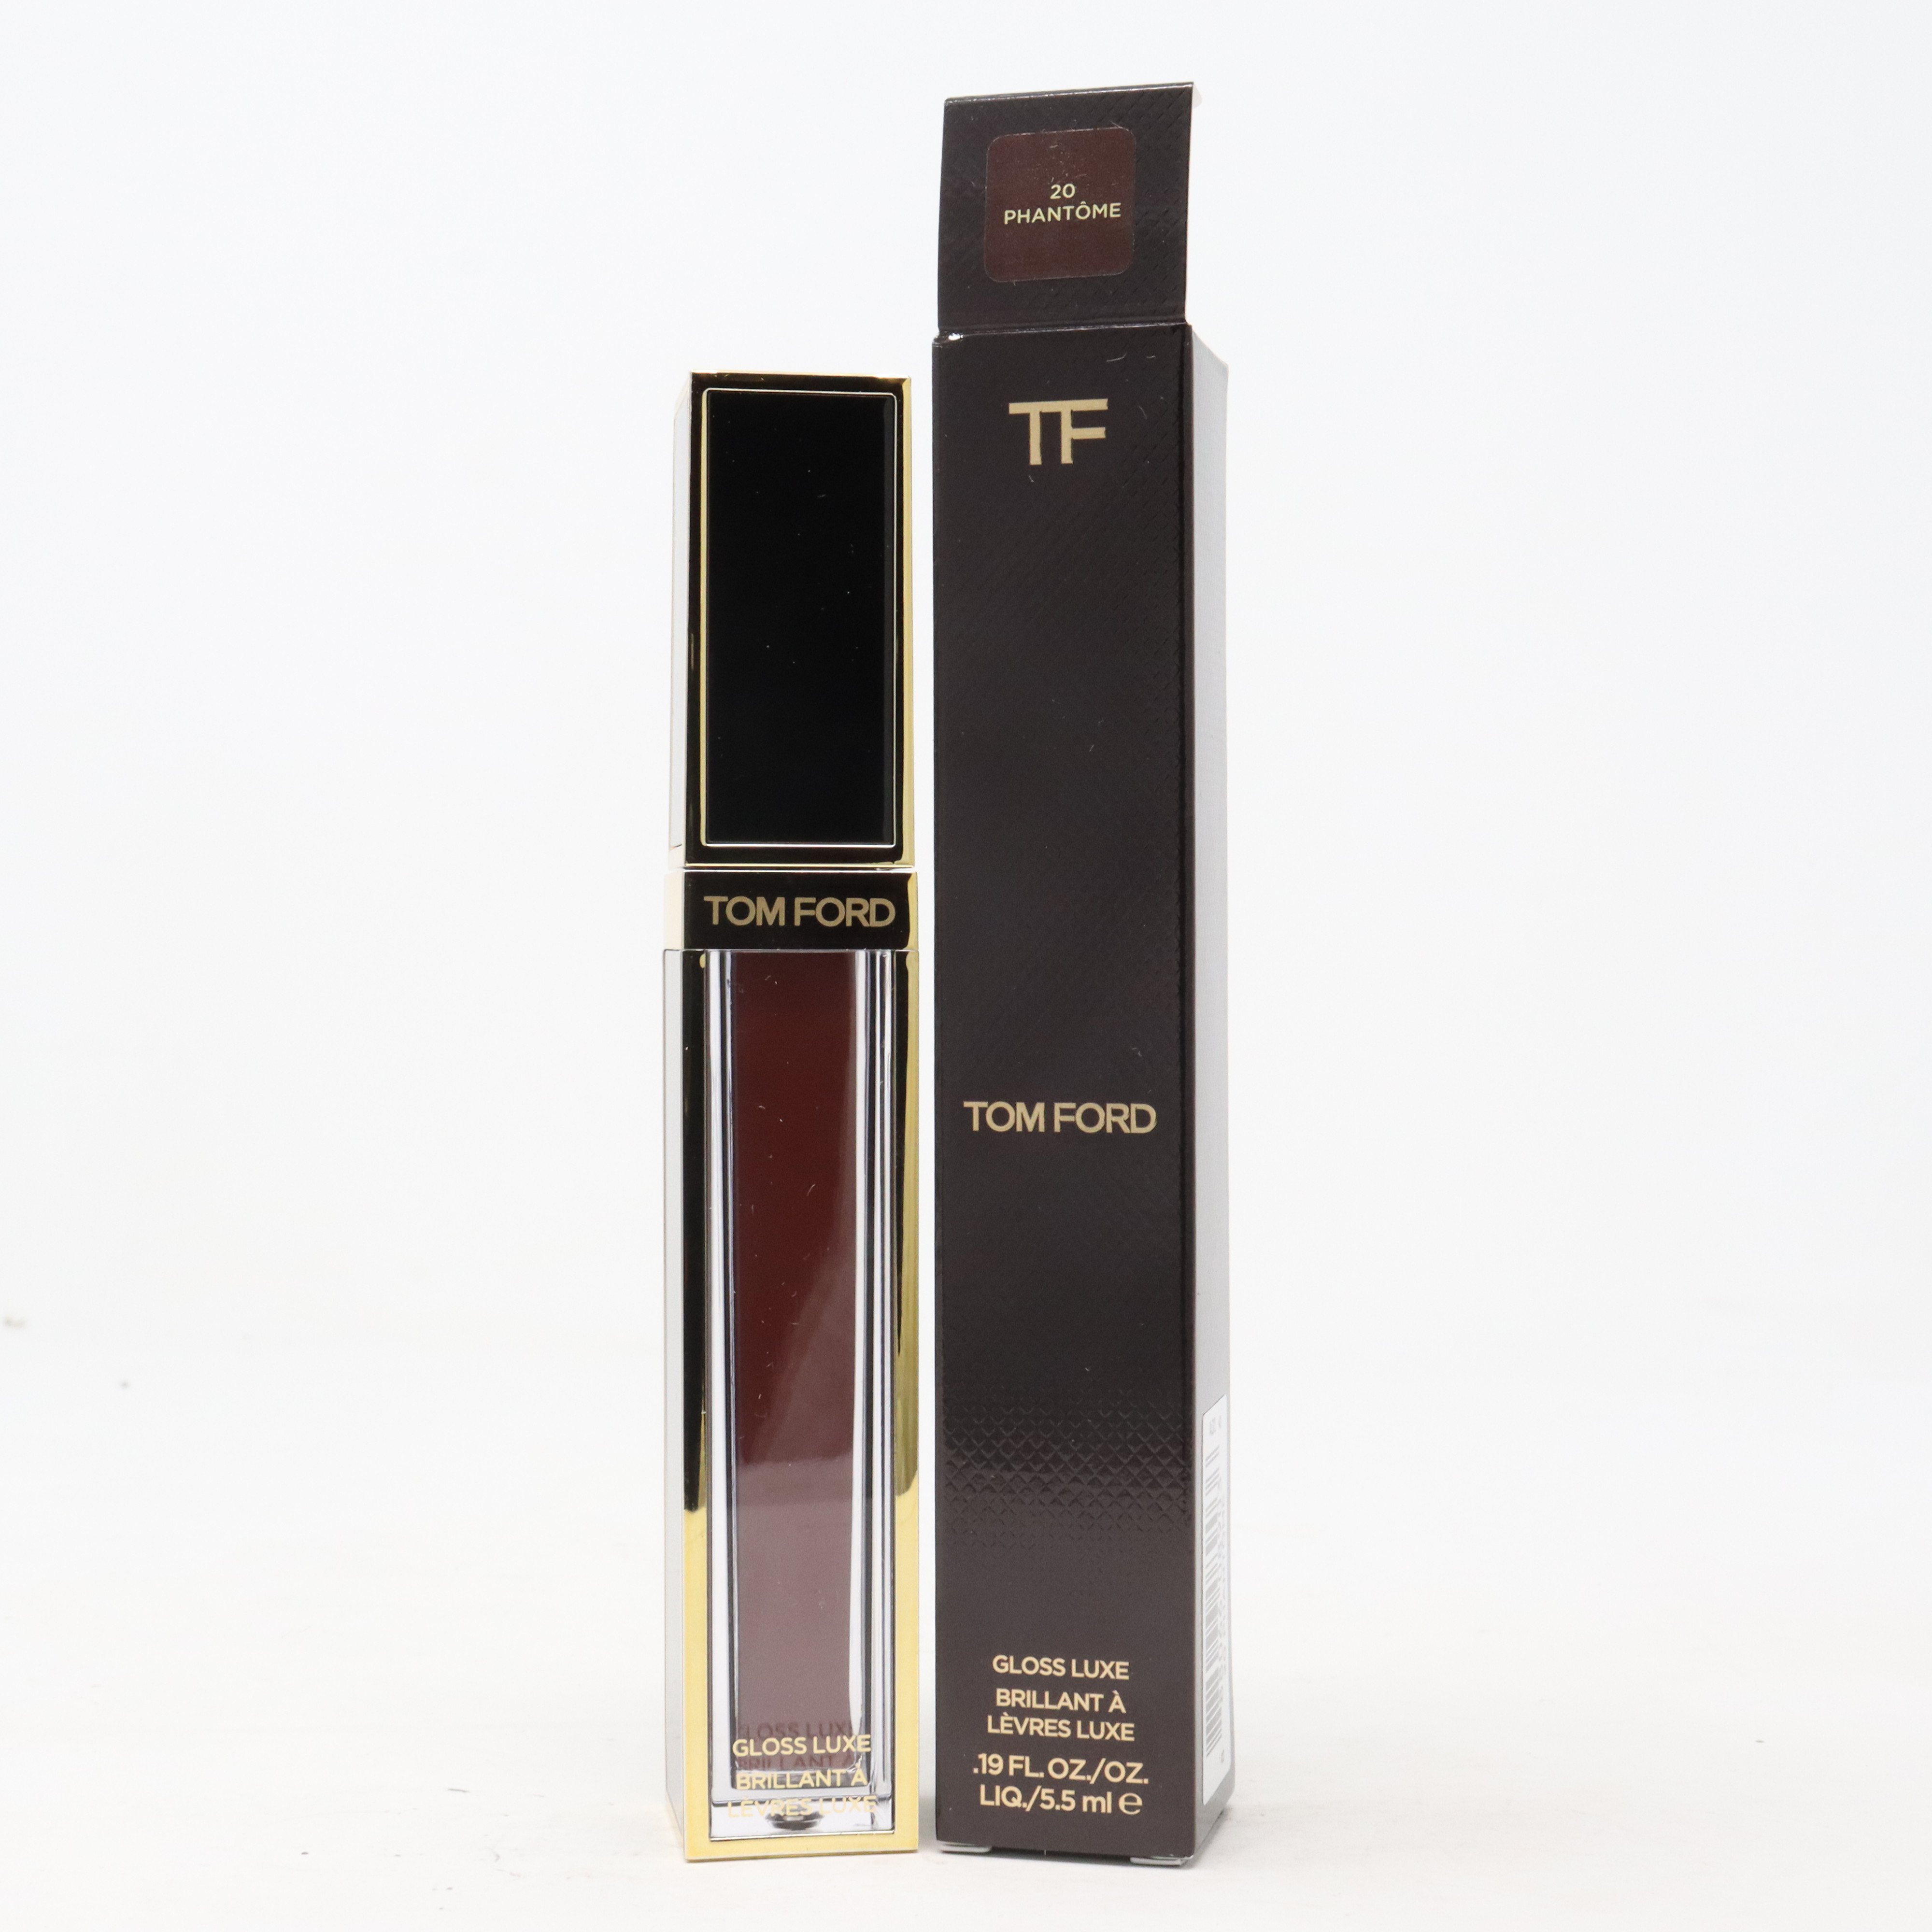 Tom Ford Gloss Luxe Lip Gloss / New With Box | eBay